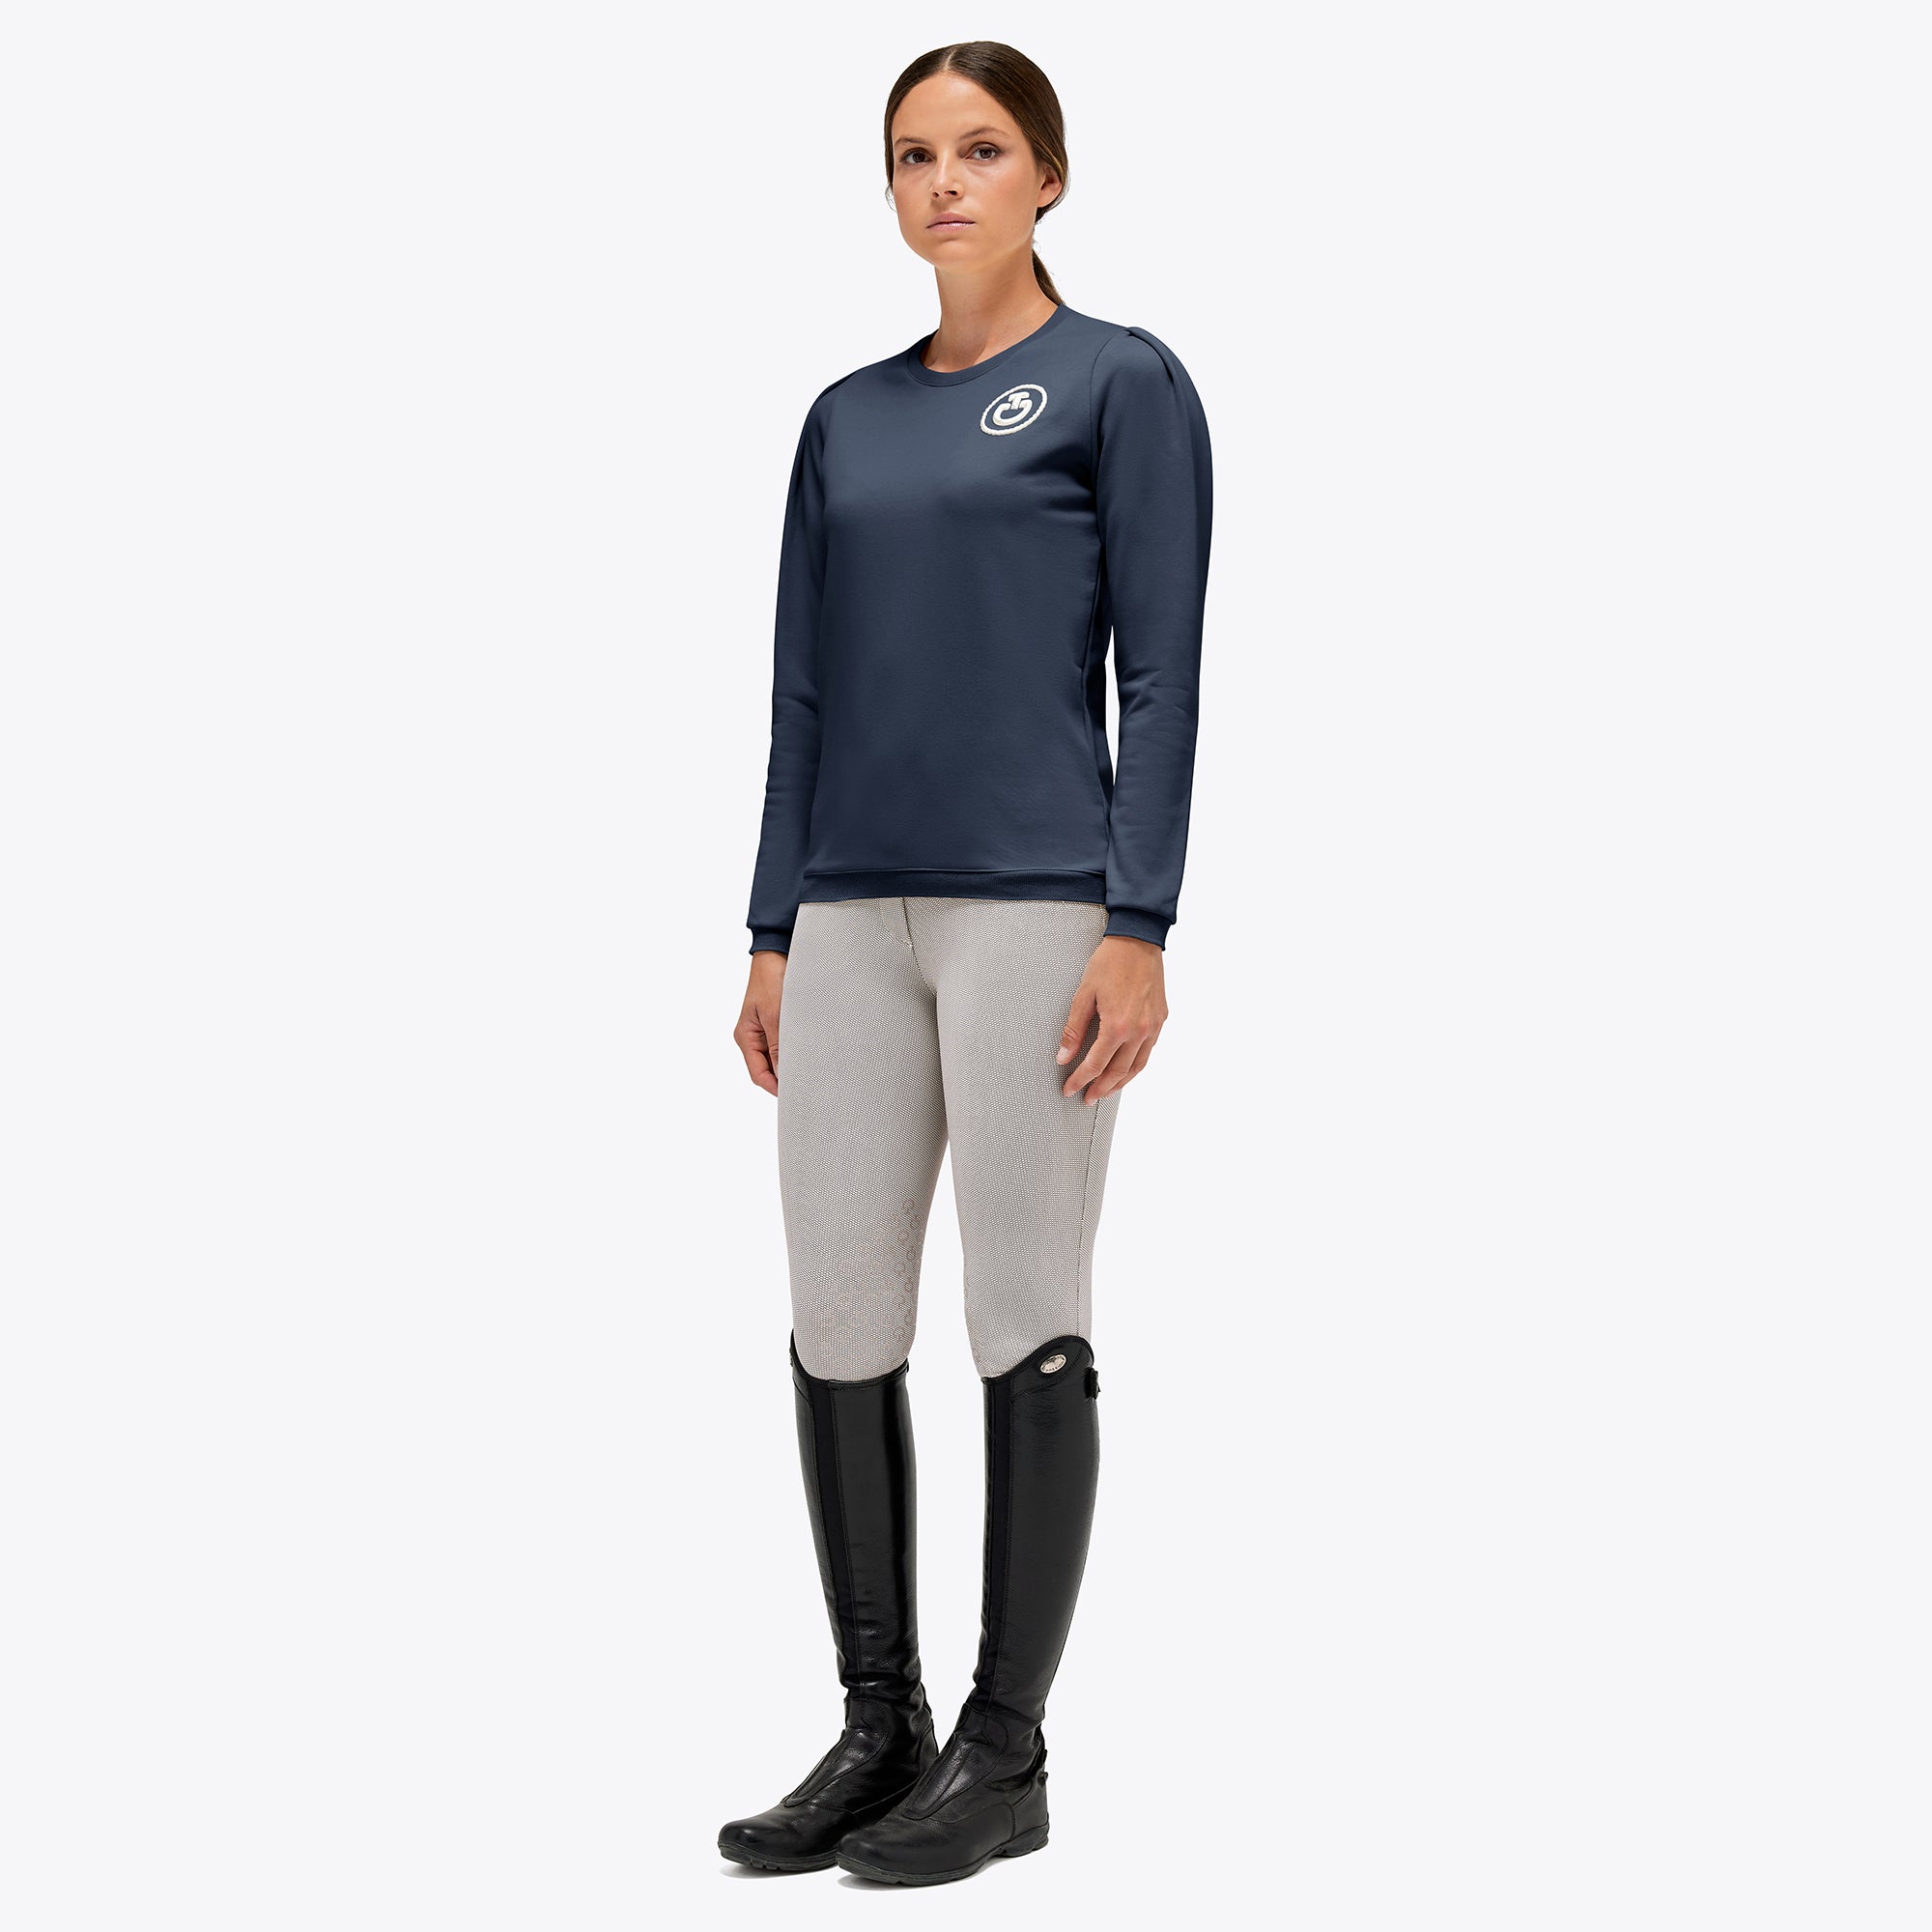 This women's sweatshirt by Cavalleria Toscana is a real eye-catcher. The nylon insert on the sides provides more comfort, while the emblem on the chest provides an attractive look. The soft cotton is comfortable to wear and resists some wind and weather. Due to the color Atlantic blue, the shirt looks modern and elegant at the same time.